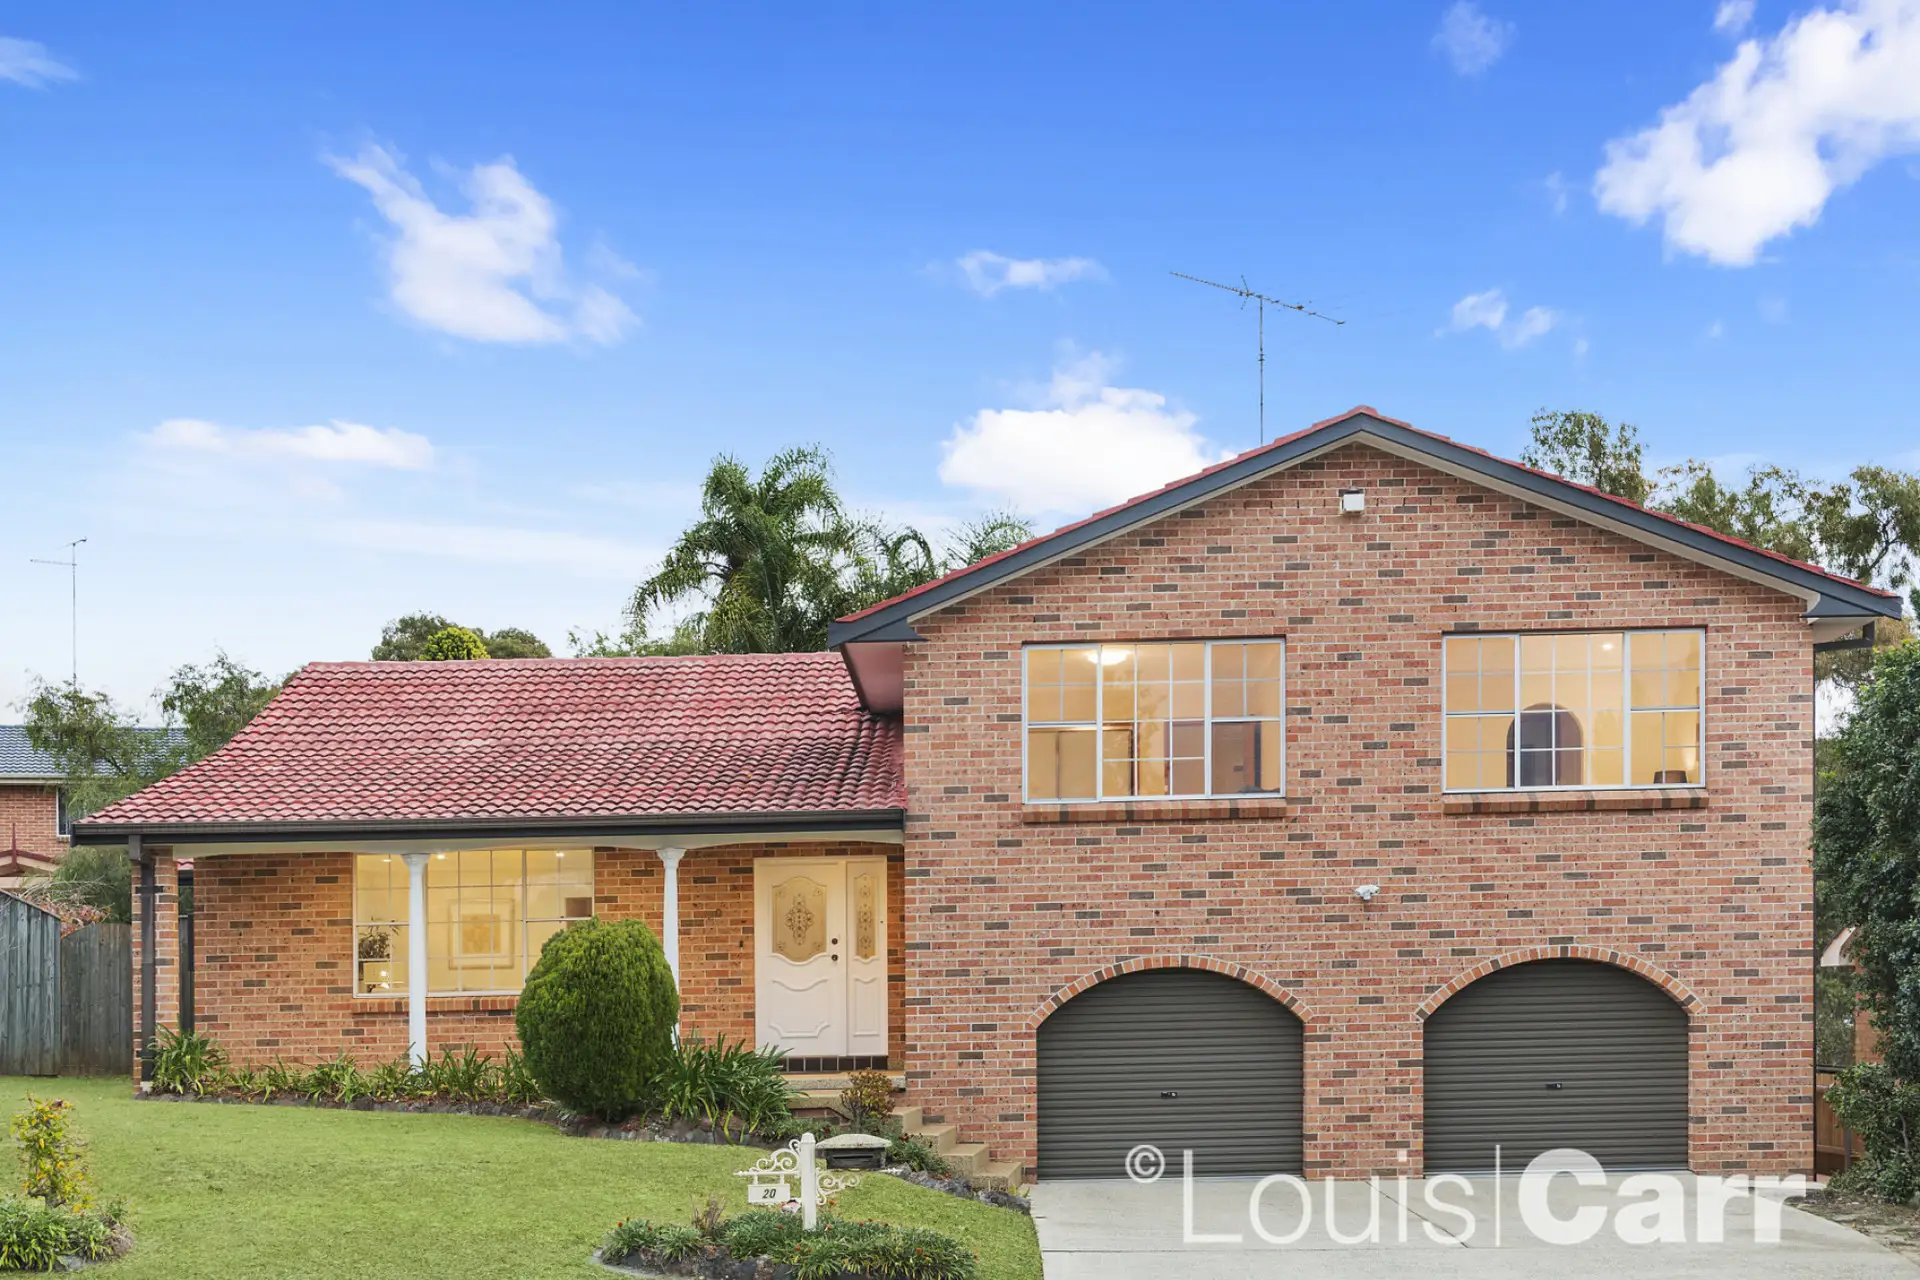 Photo #1: 20 Hibiscus Place, Cherrybrook - Sold by Louis Carr Real Estate